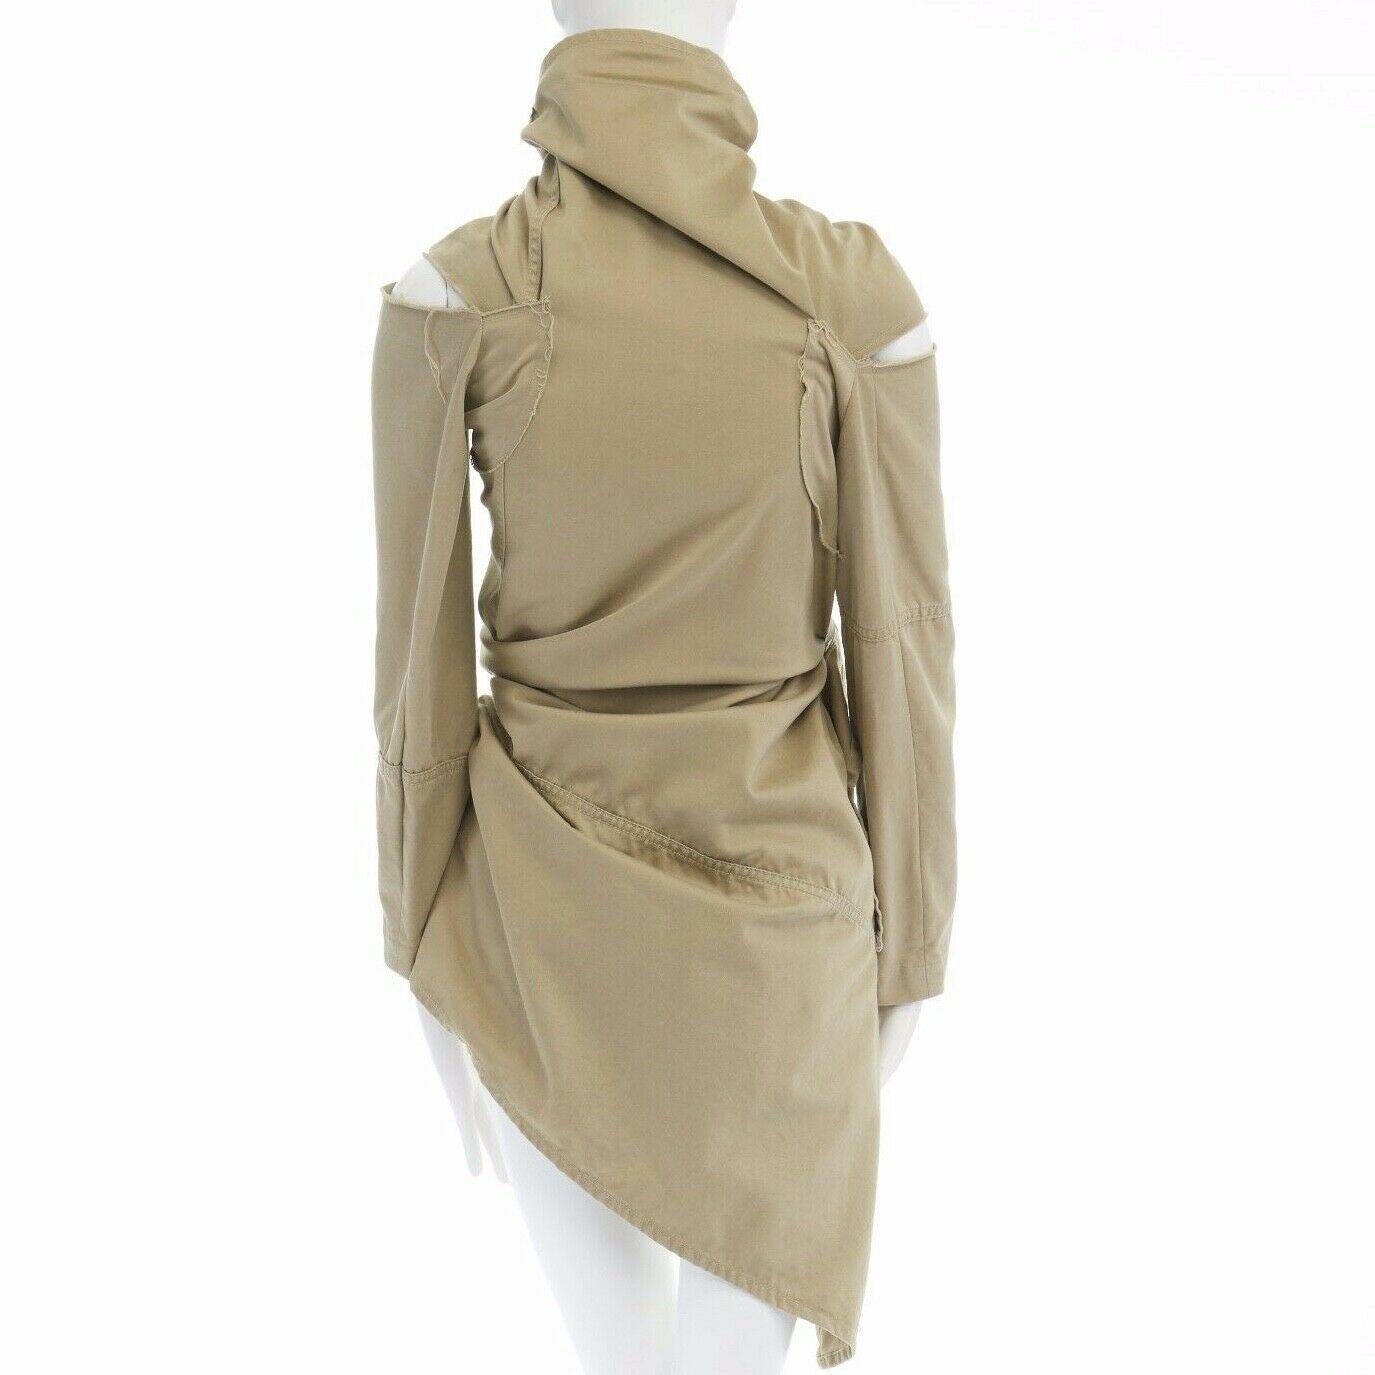 runway COMME DES GARCONS AW03 square zip up bundled deconstructed trench coat S

COMME DES GARCONS
FROM THE FALL WINTER 2003 COLLECTION
100% cotton. Beige. Deconstructed trench coat. 
ZIp up front in an angular U shape. Bundled effect. Cut out at